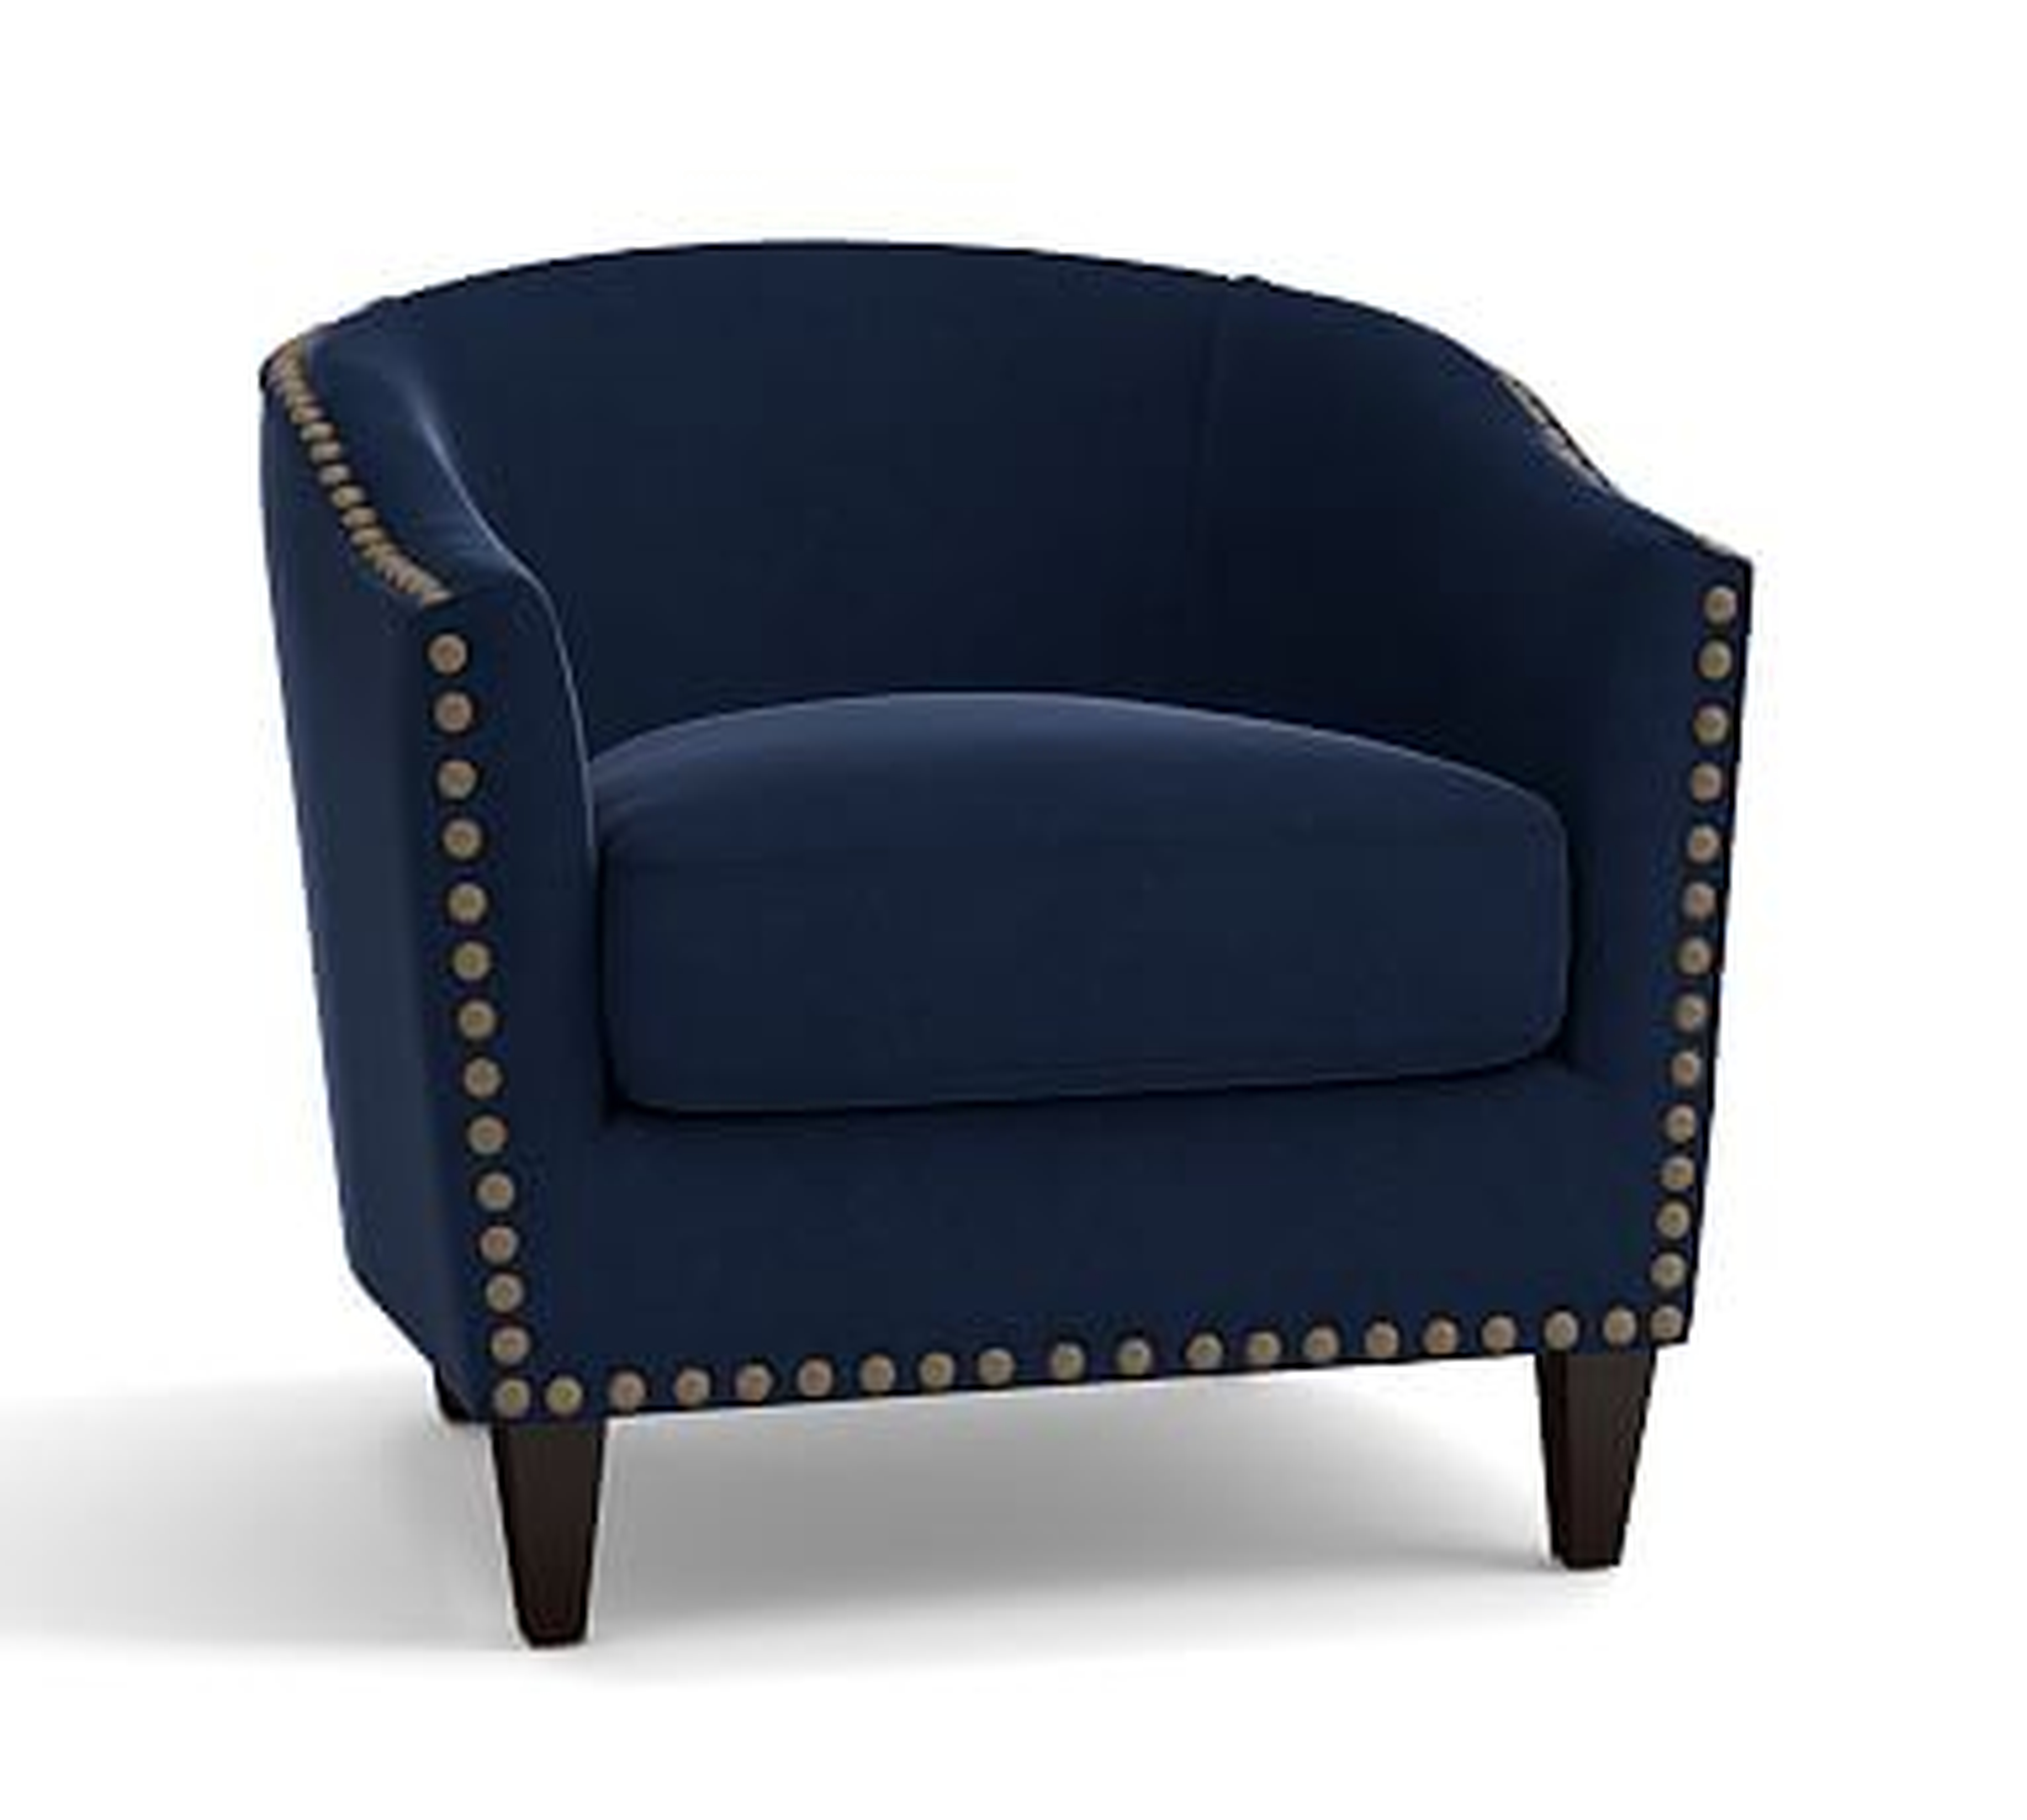 Harlow Upholstered Armchair with Bronze Nailheads, Polyester Wrapped Cushions, Performance Everydayvelvet(TM) Navy - Pottery Barn